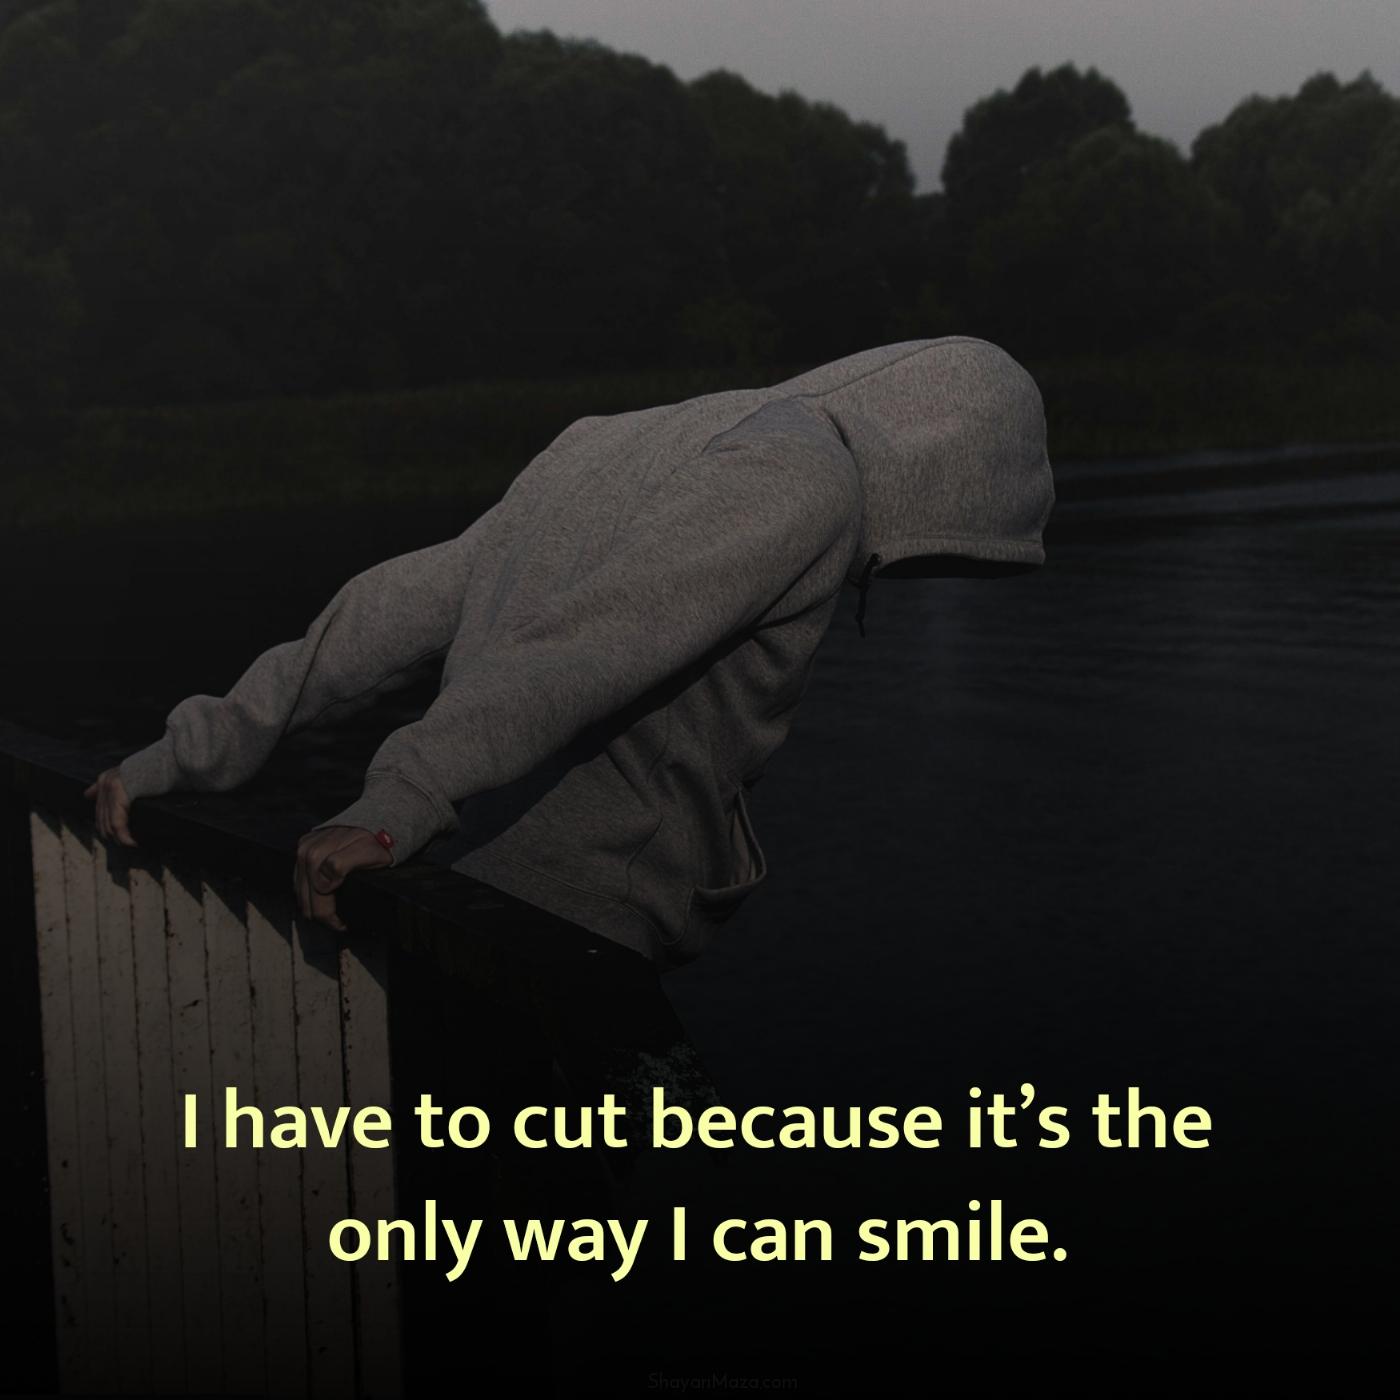 I have to cut because its the only way I can smile